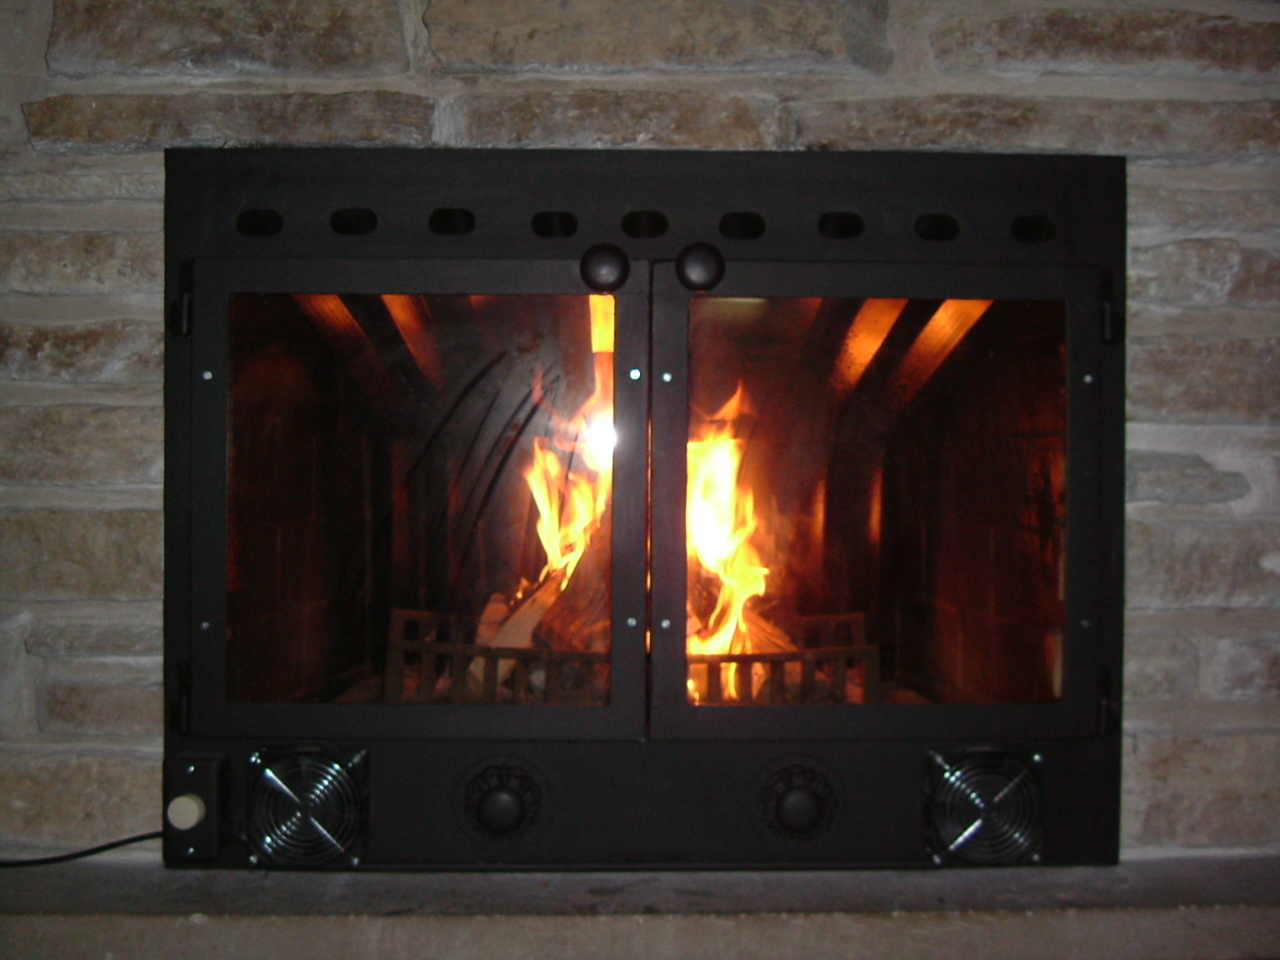 Close the damper on fire insert when not in use.